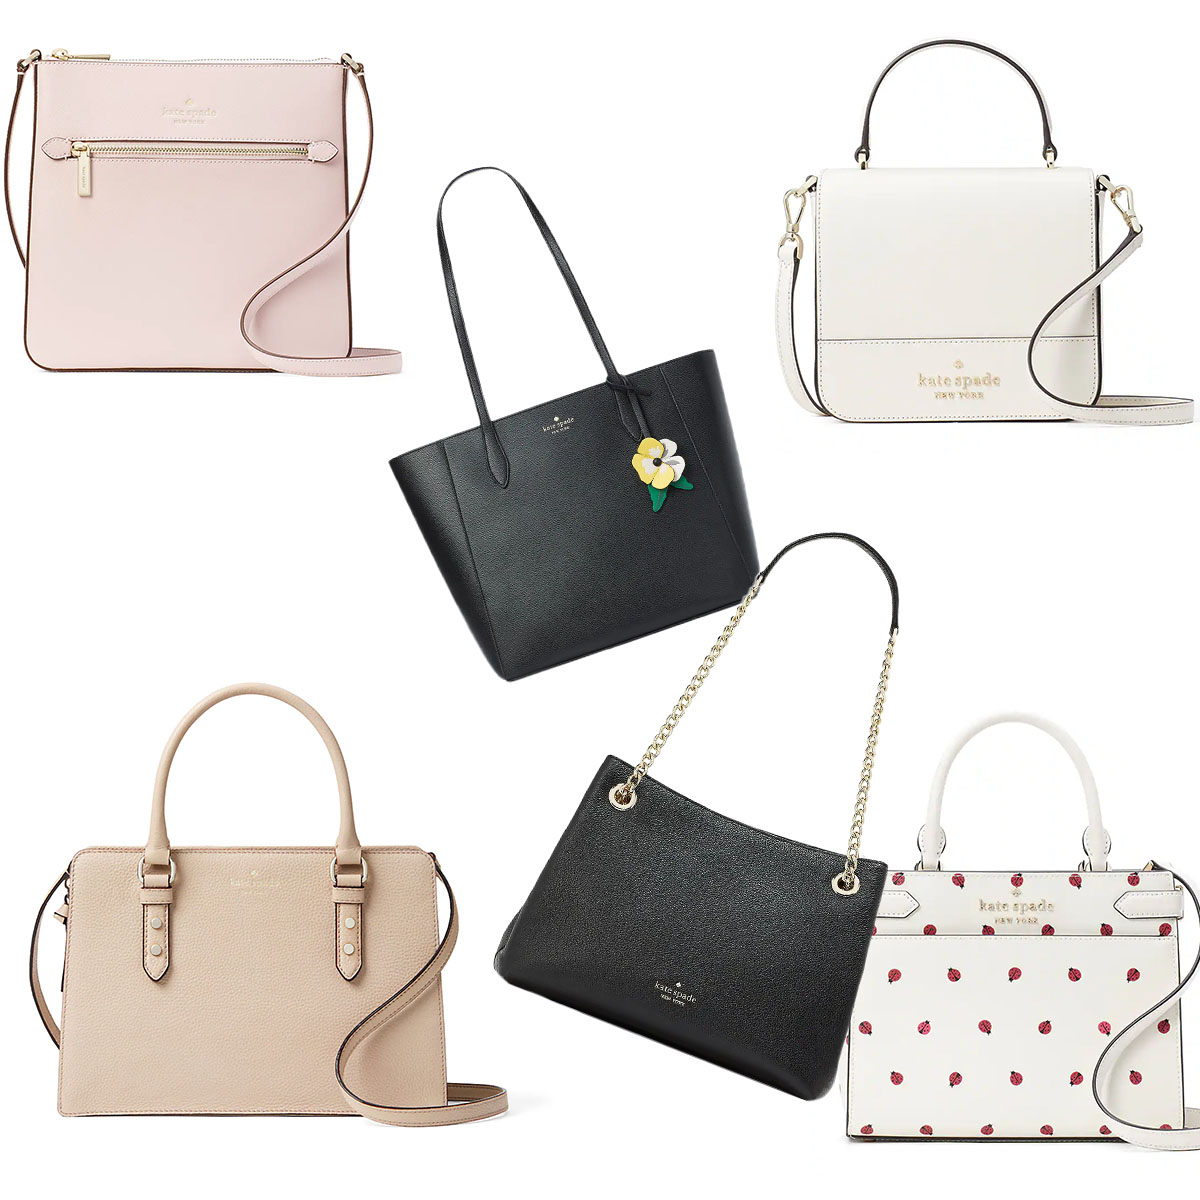 Best Kate Spade sale picks for spring: Handbags, tote bags, wallets and more